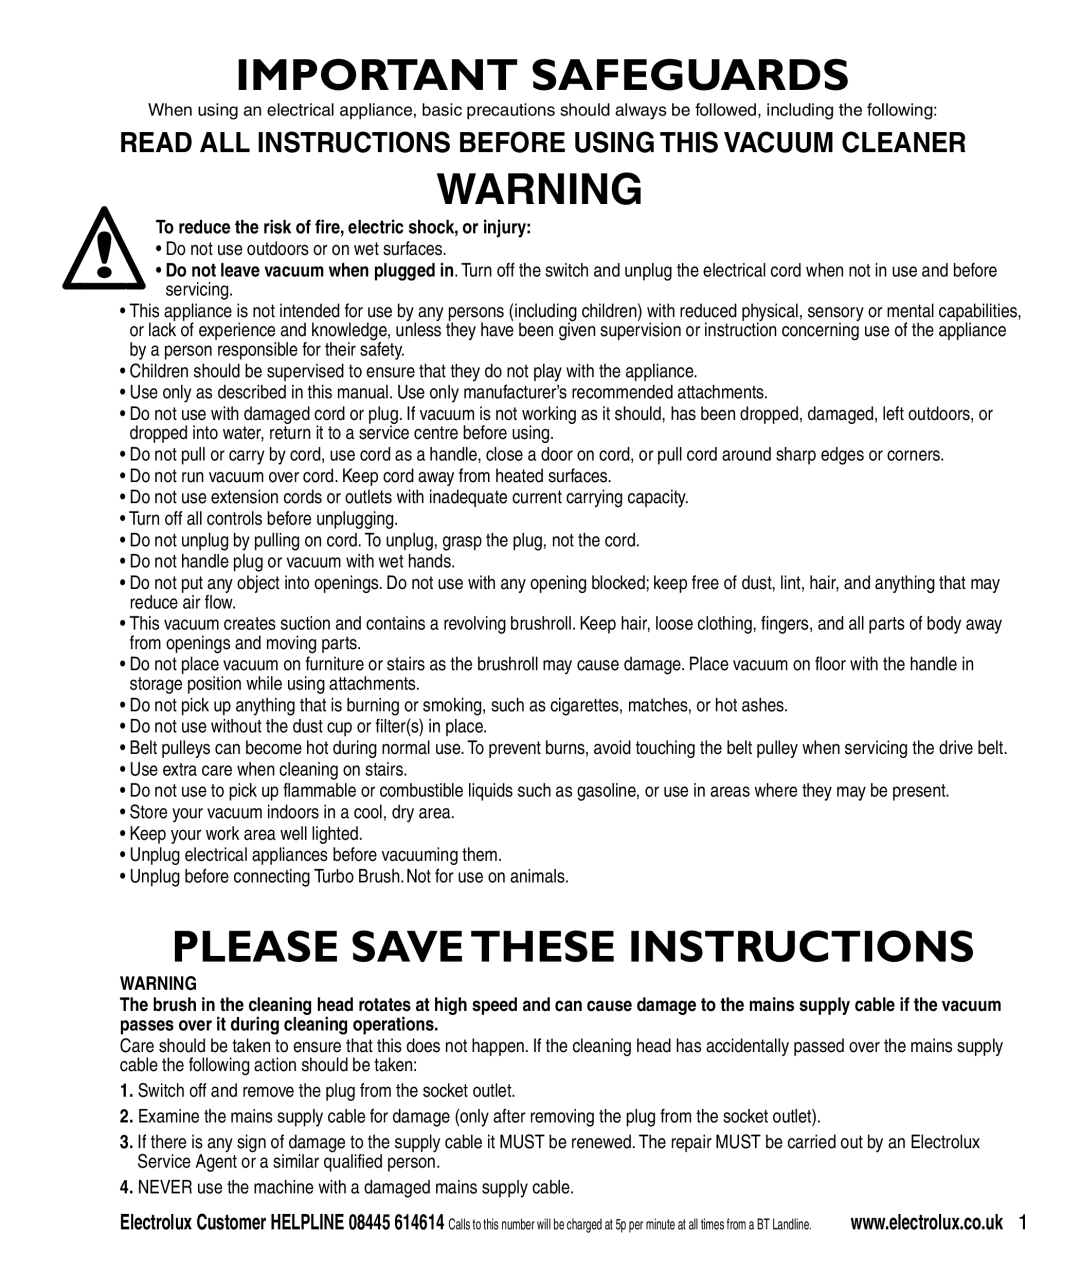 Electrolux Z3040 Series manual Read All Instructions Before Using This Vacuum Cleaner, Important Safeguards 